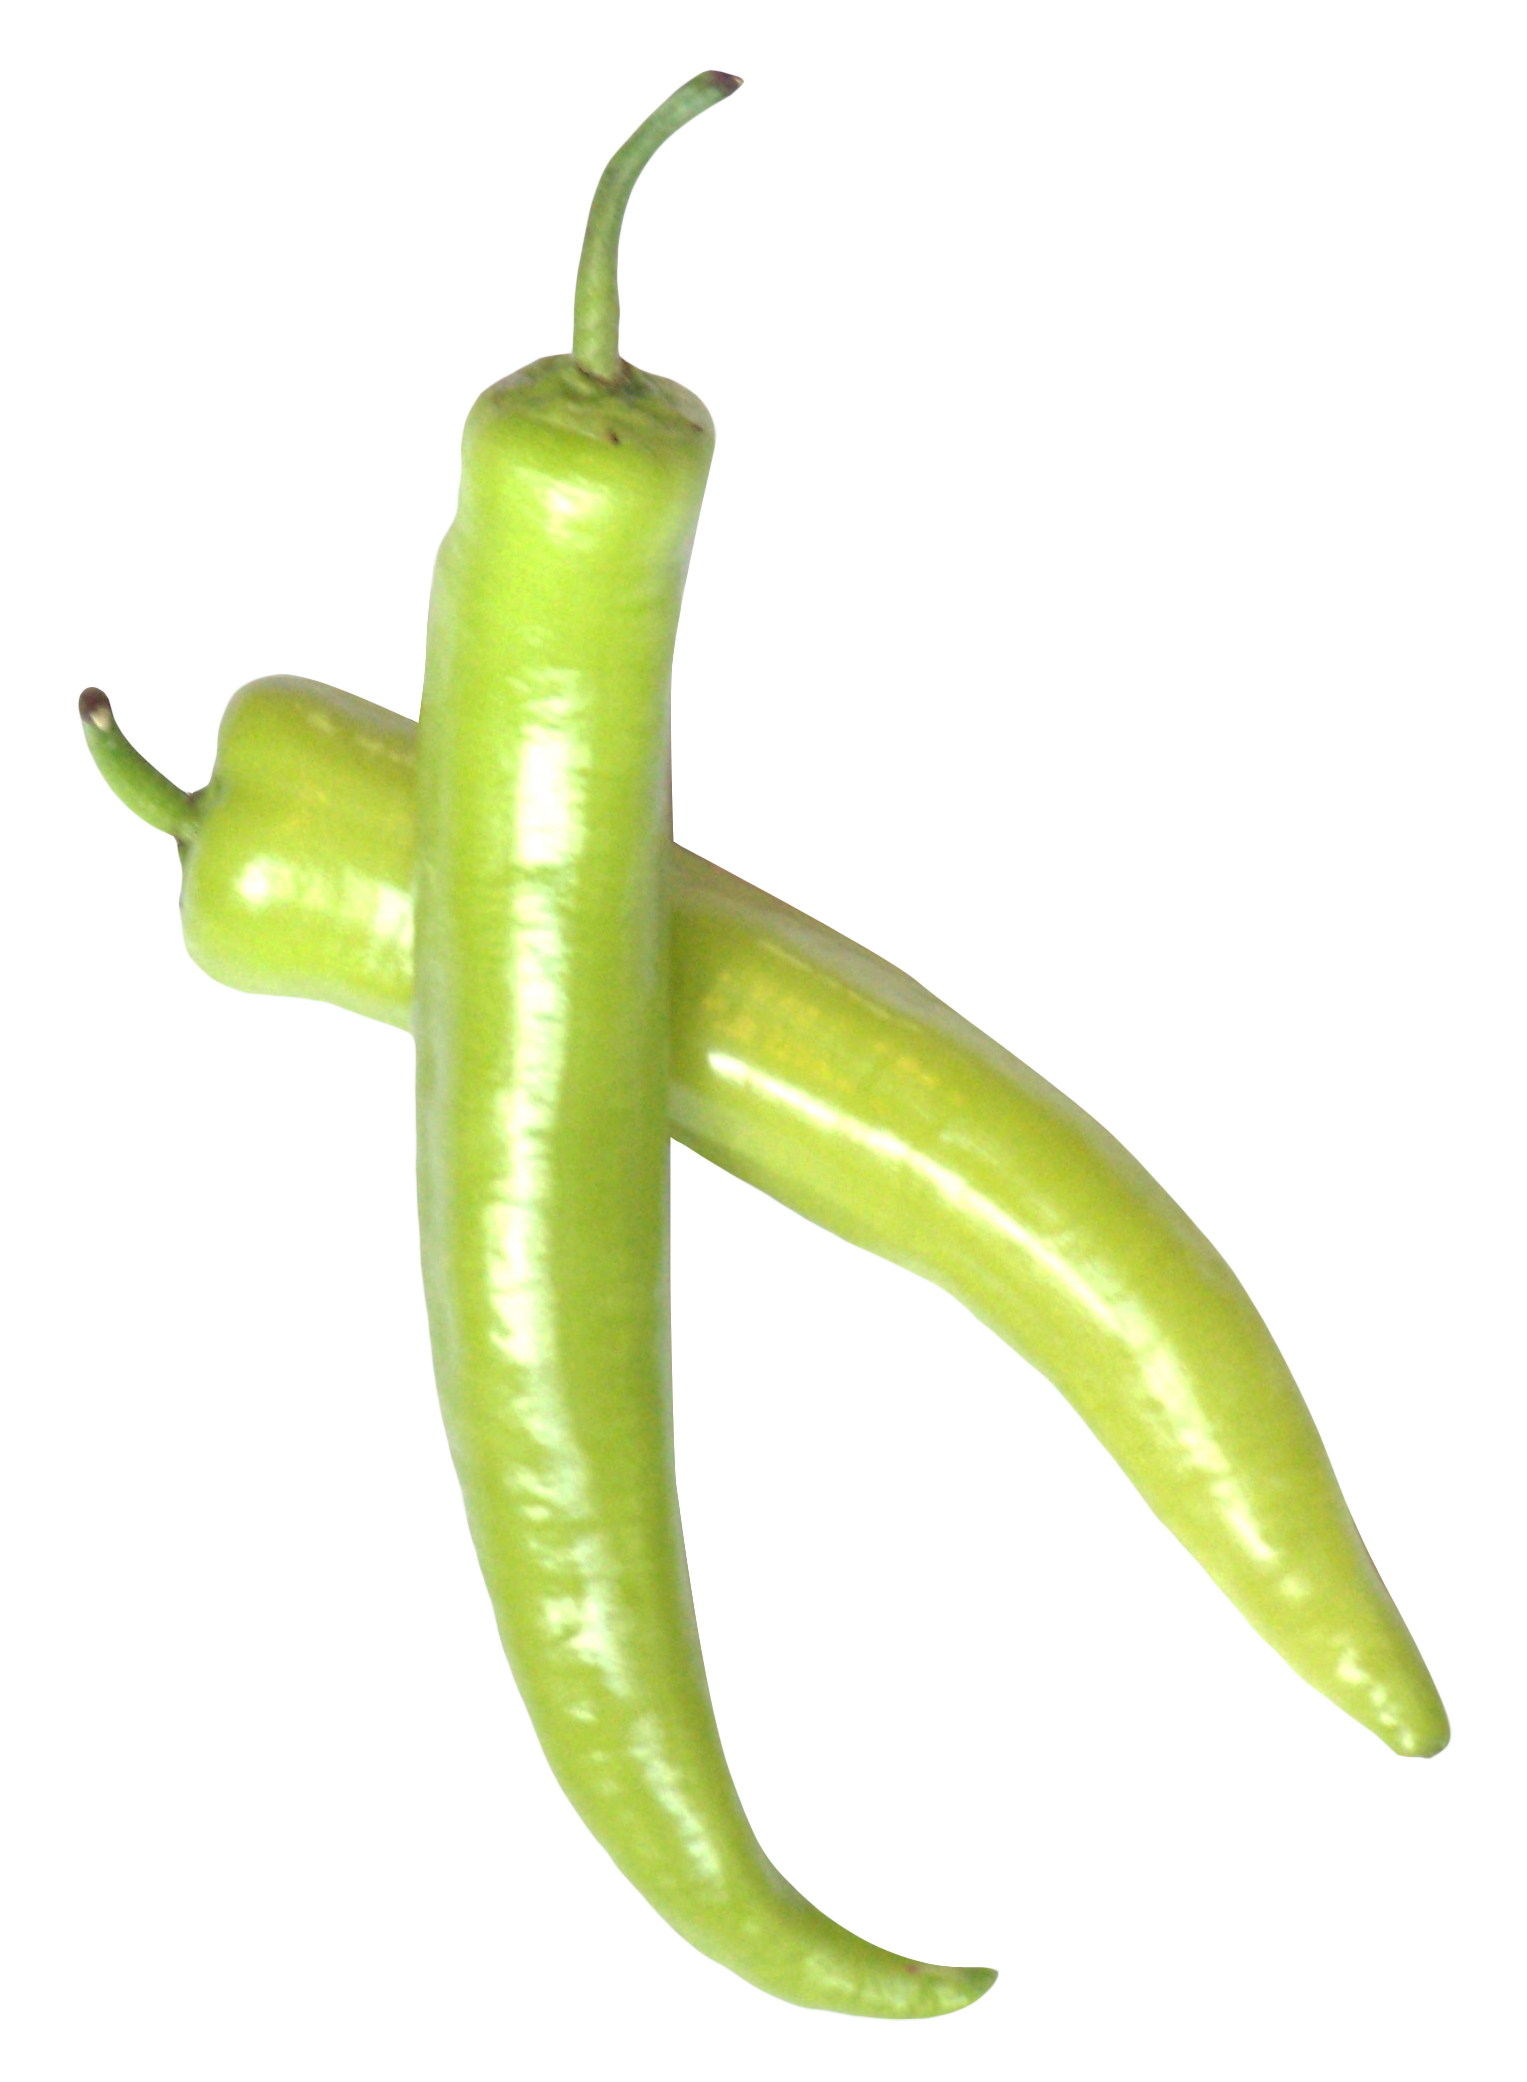 Fresh Chili Green Pepper Photos PNG Image